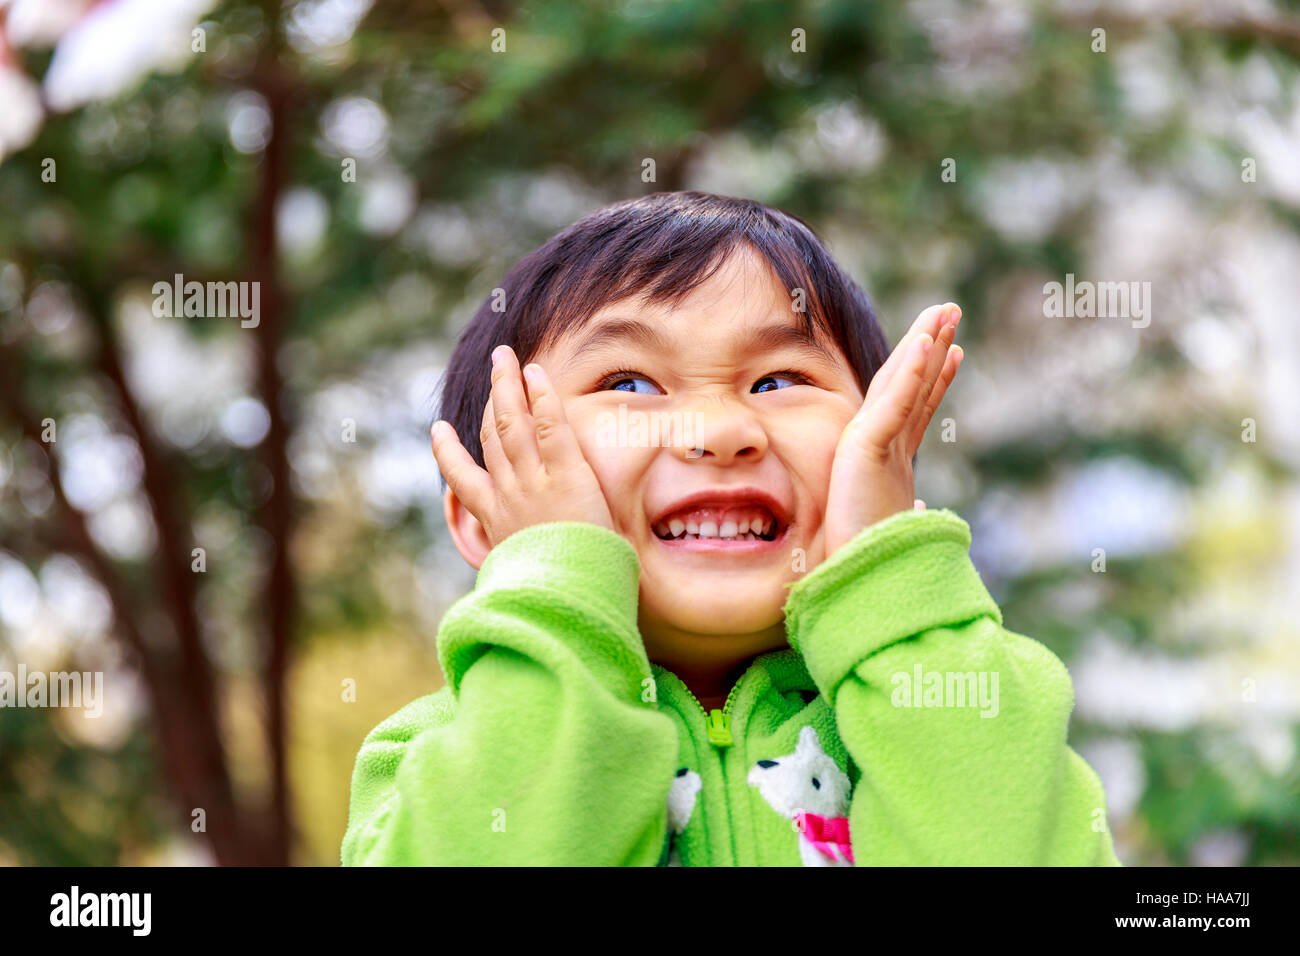 Adorable girl enjoys play time in the woods, smiling. Stock Photo